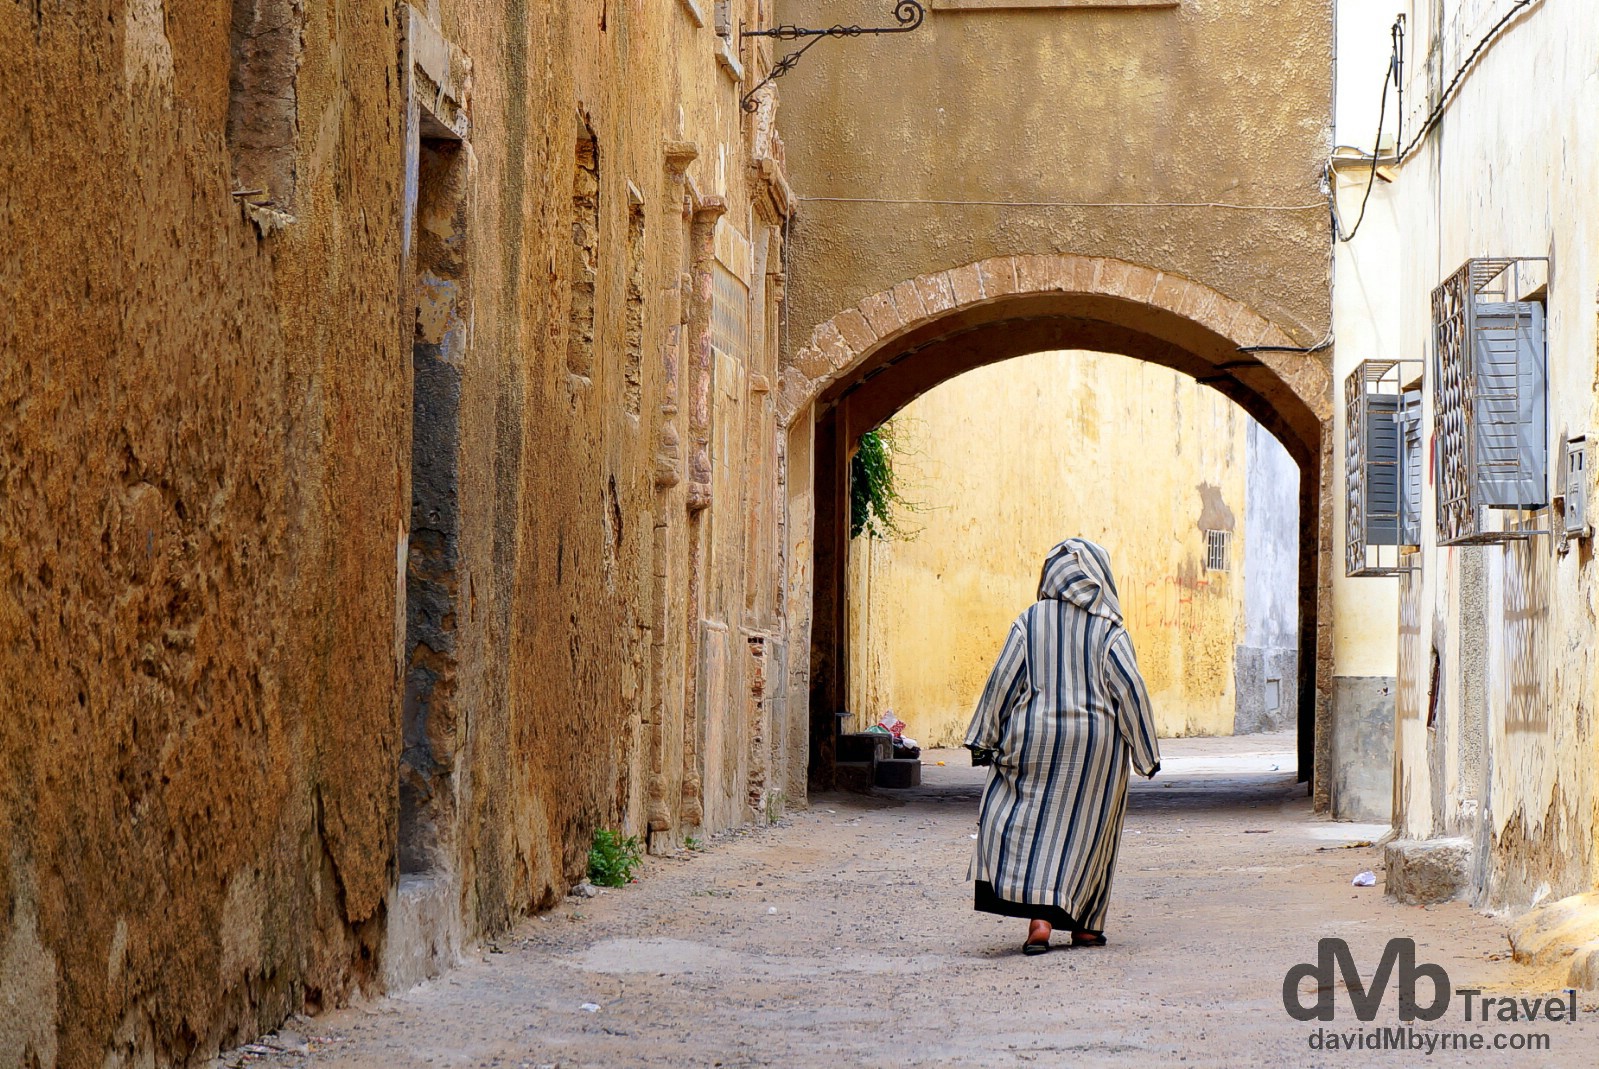 In the lanes of the UNESCO-listed Cite Portugaise, El Jadida, Morocco. May 1st, 2014.